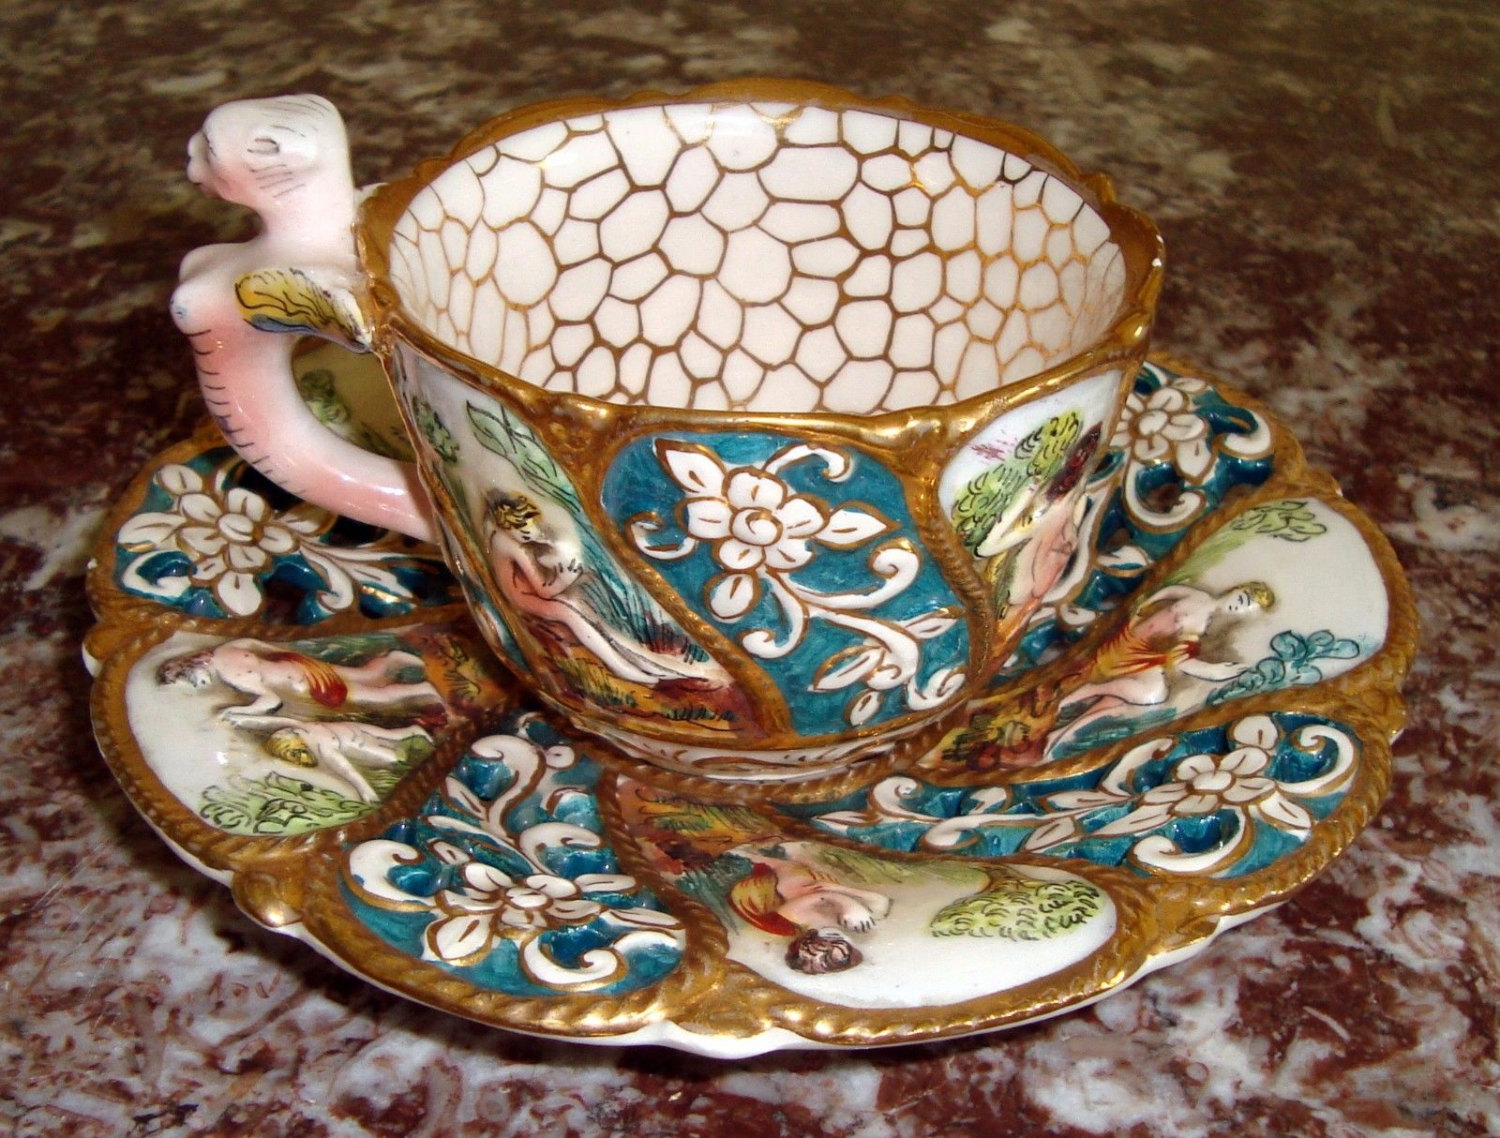 Capodimonte Cup & Saucer - $491.09